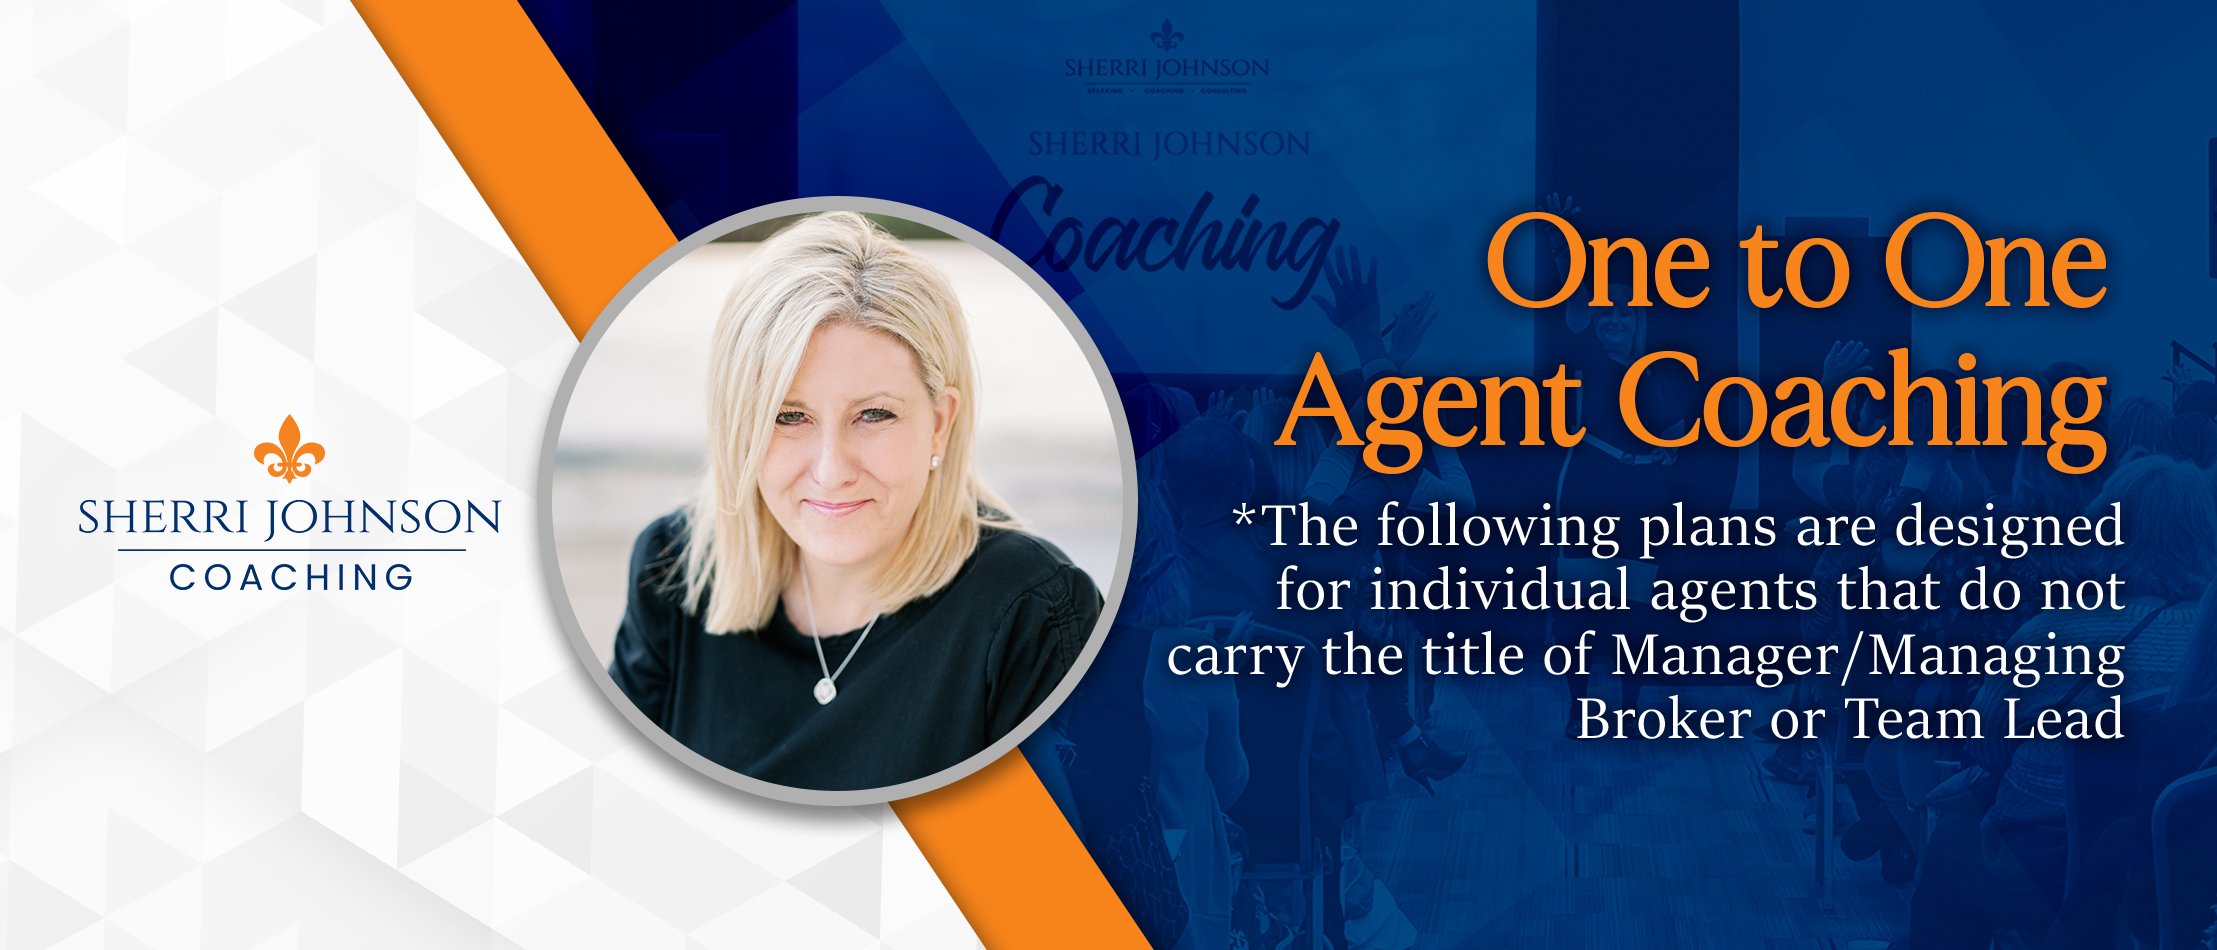 One to One Agent Coaching Banner 2217 x 950 (1)